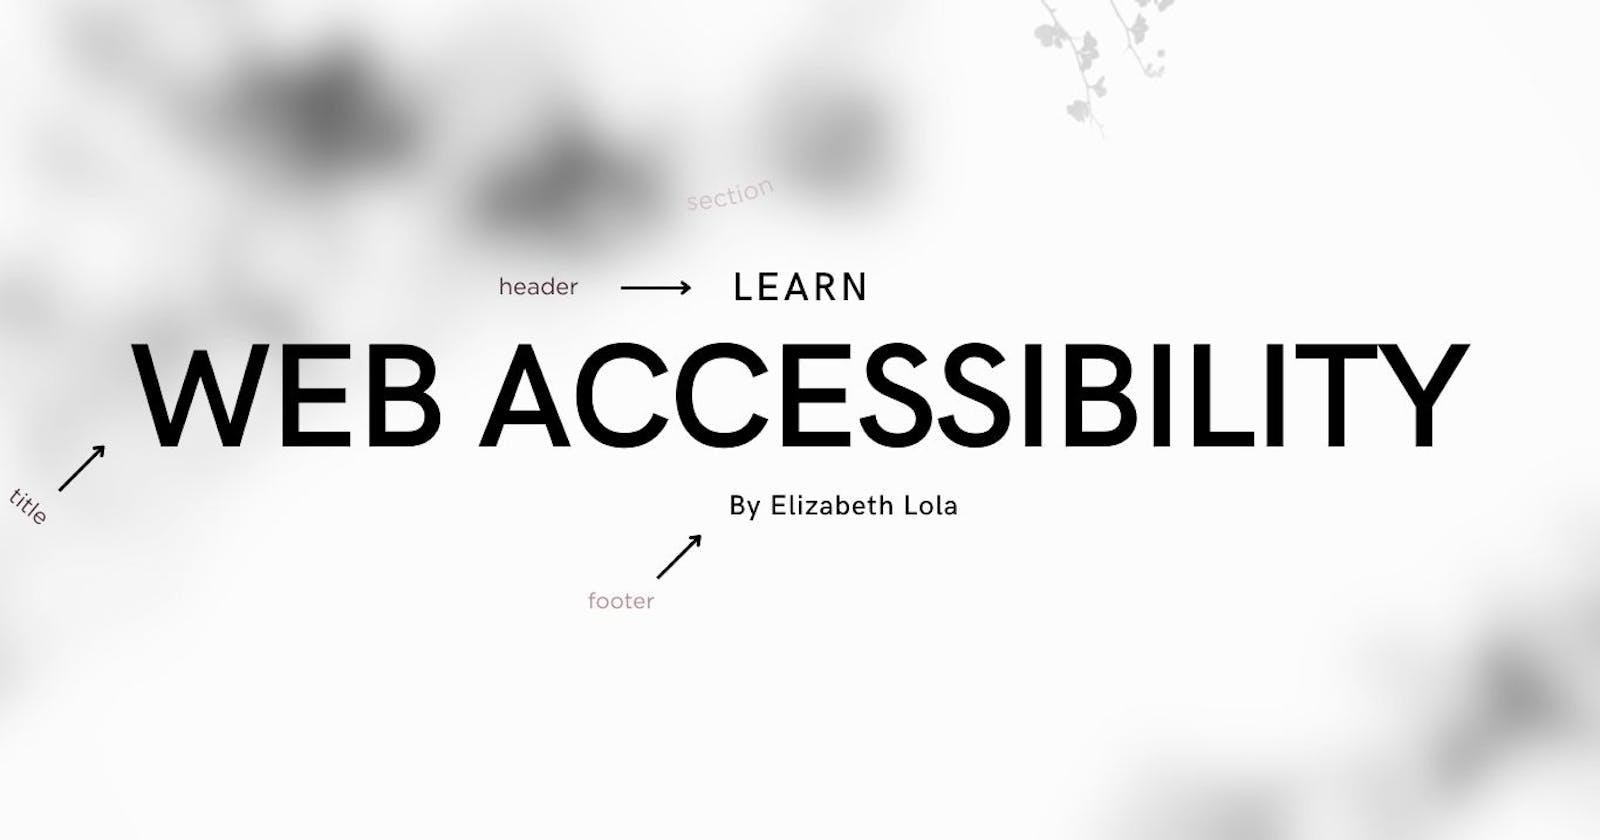 A beginner's guide to building an accessible website